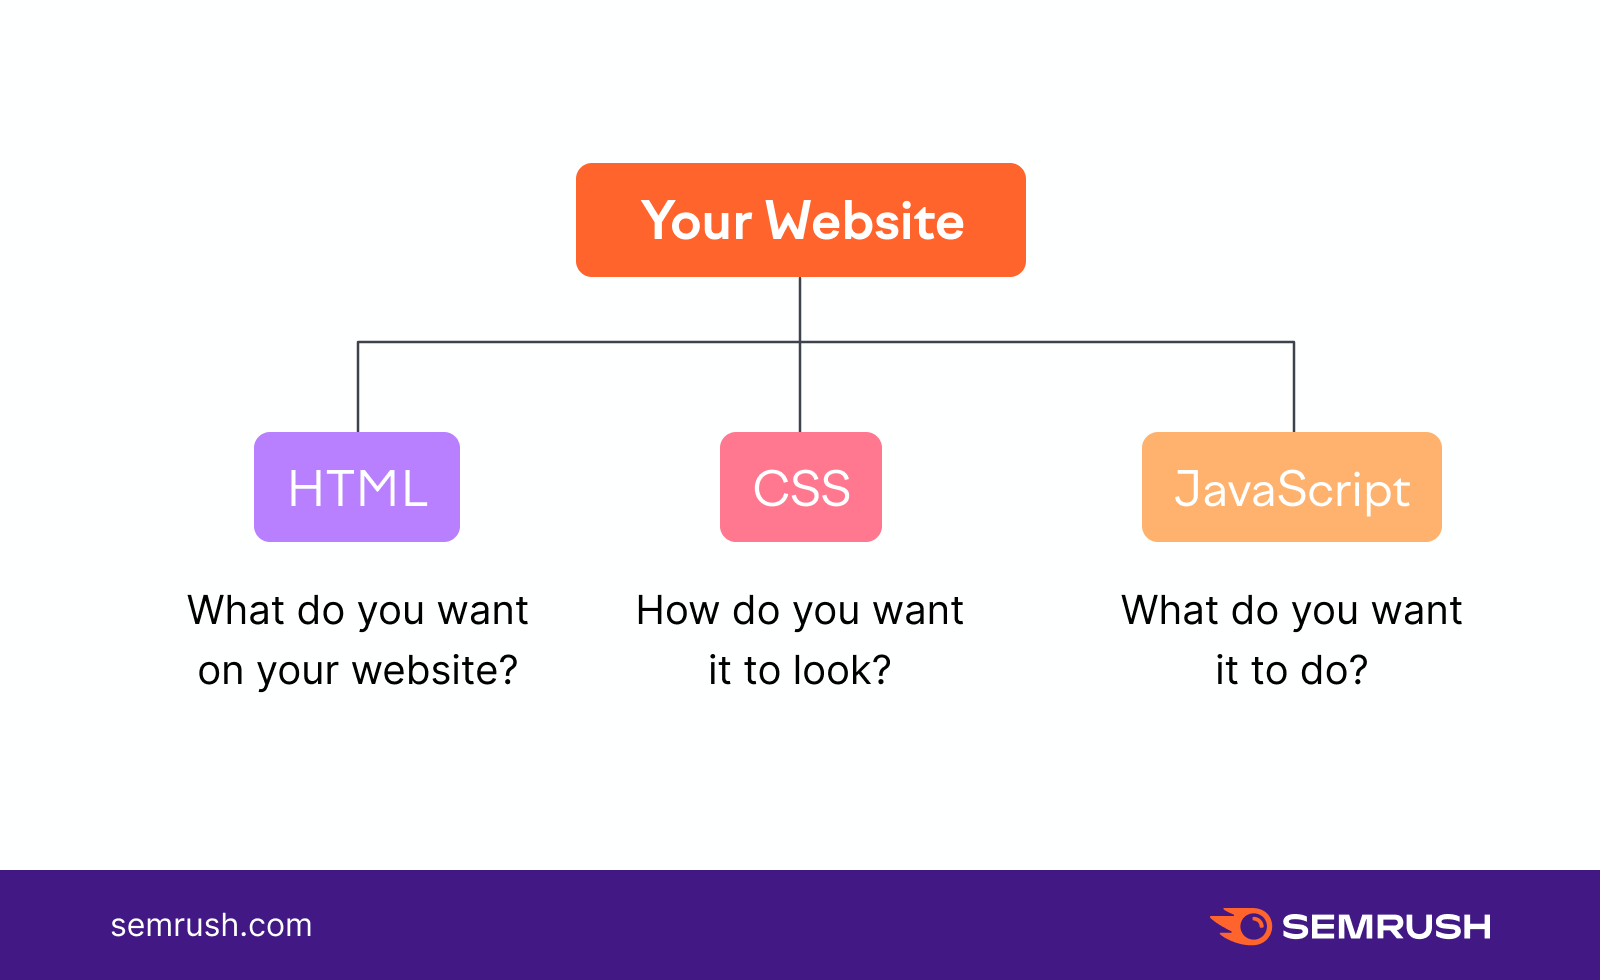 Your website branching into HTML or what do you want on your website, CSS or how do you want it to look, or JavaScript aka what do you want it to do.